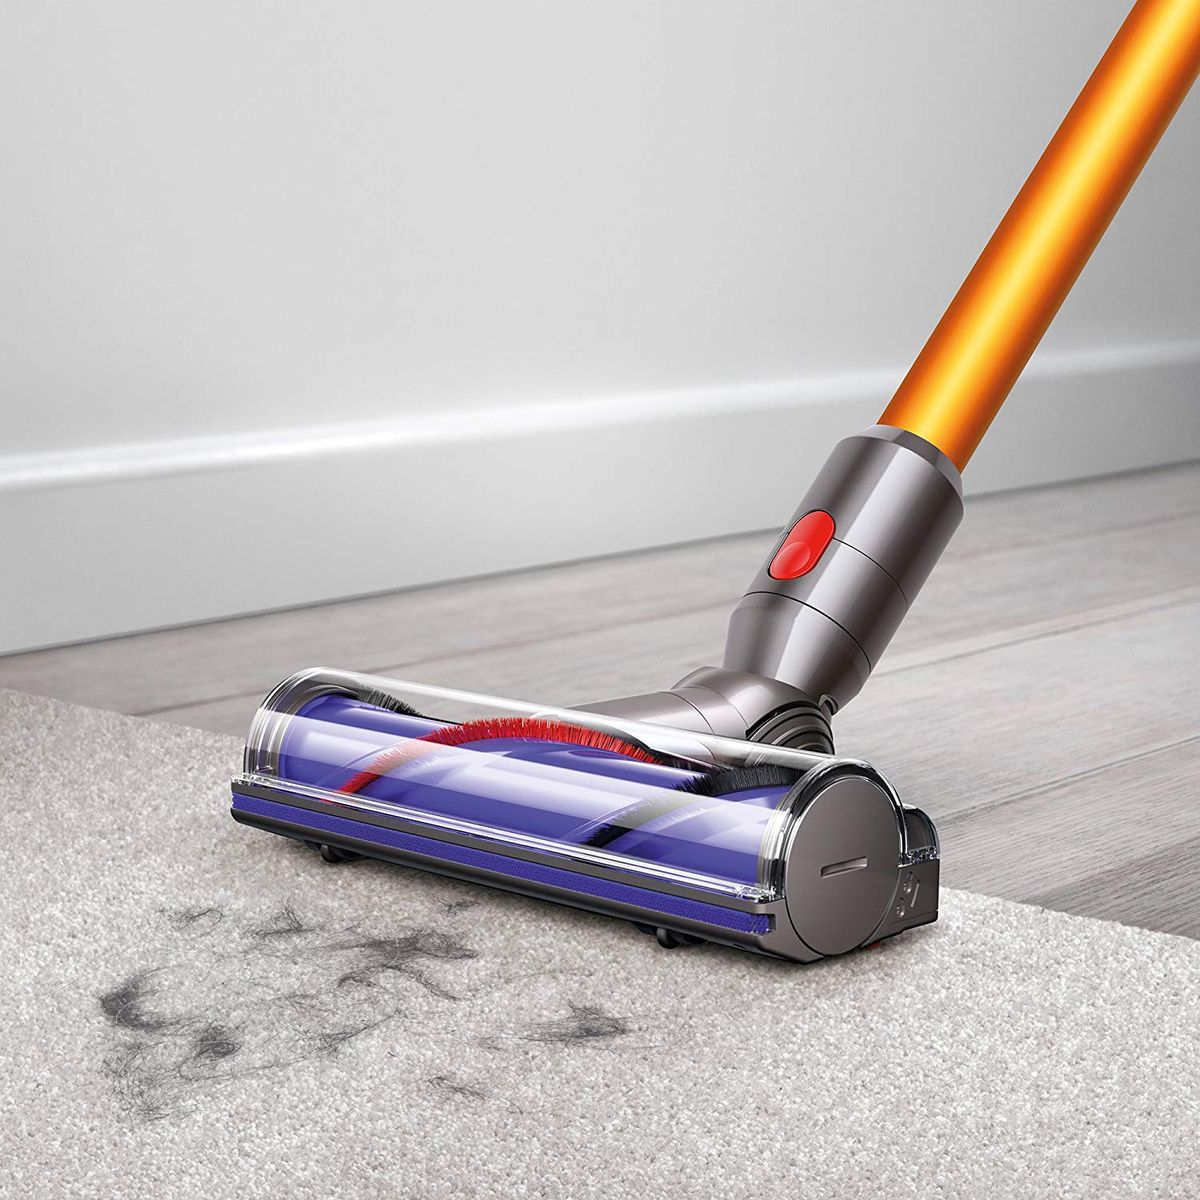 Devise sprede Græsse A Cordless Dyson Vacuum Cleaner Is On Sale On Amazon